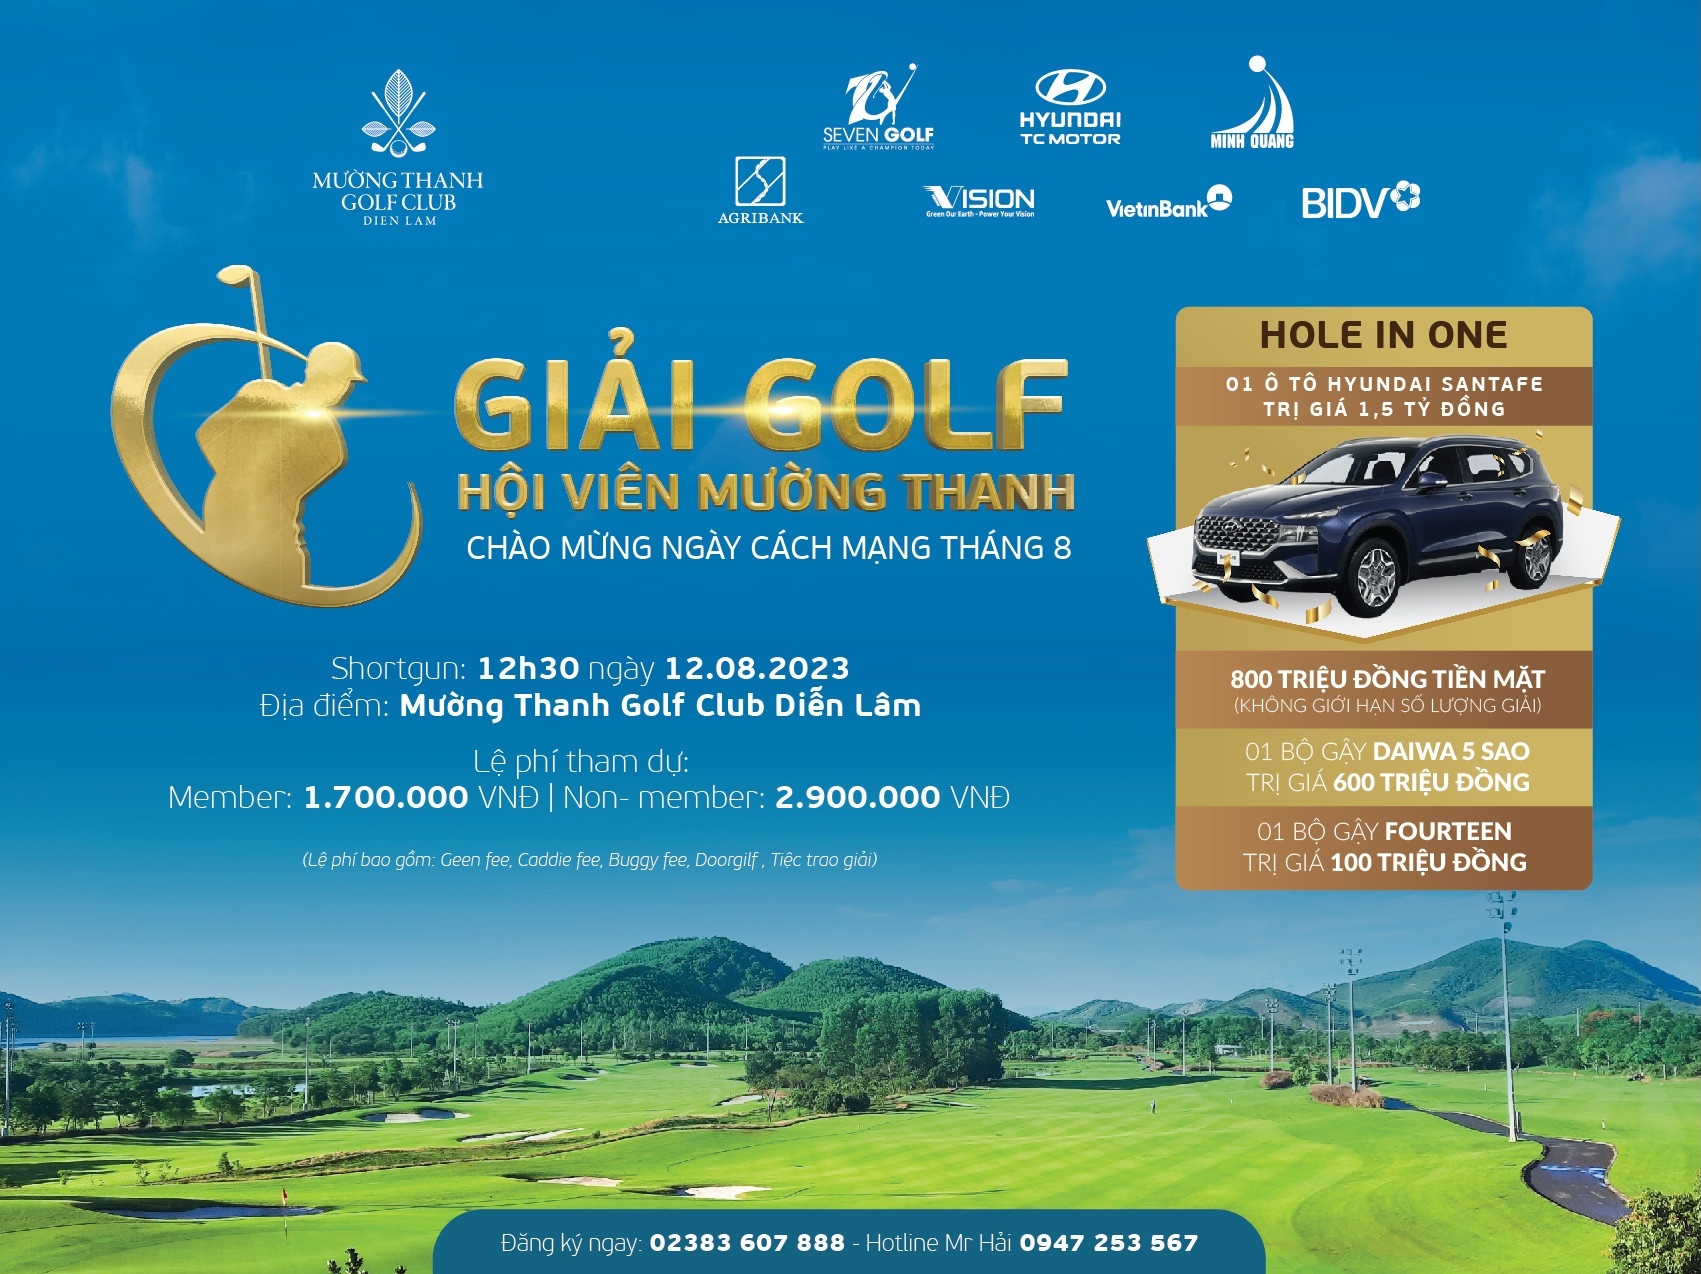 Tournament taking place at Muong Thanh Golf Club Dien Lam on August 12